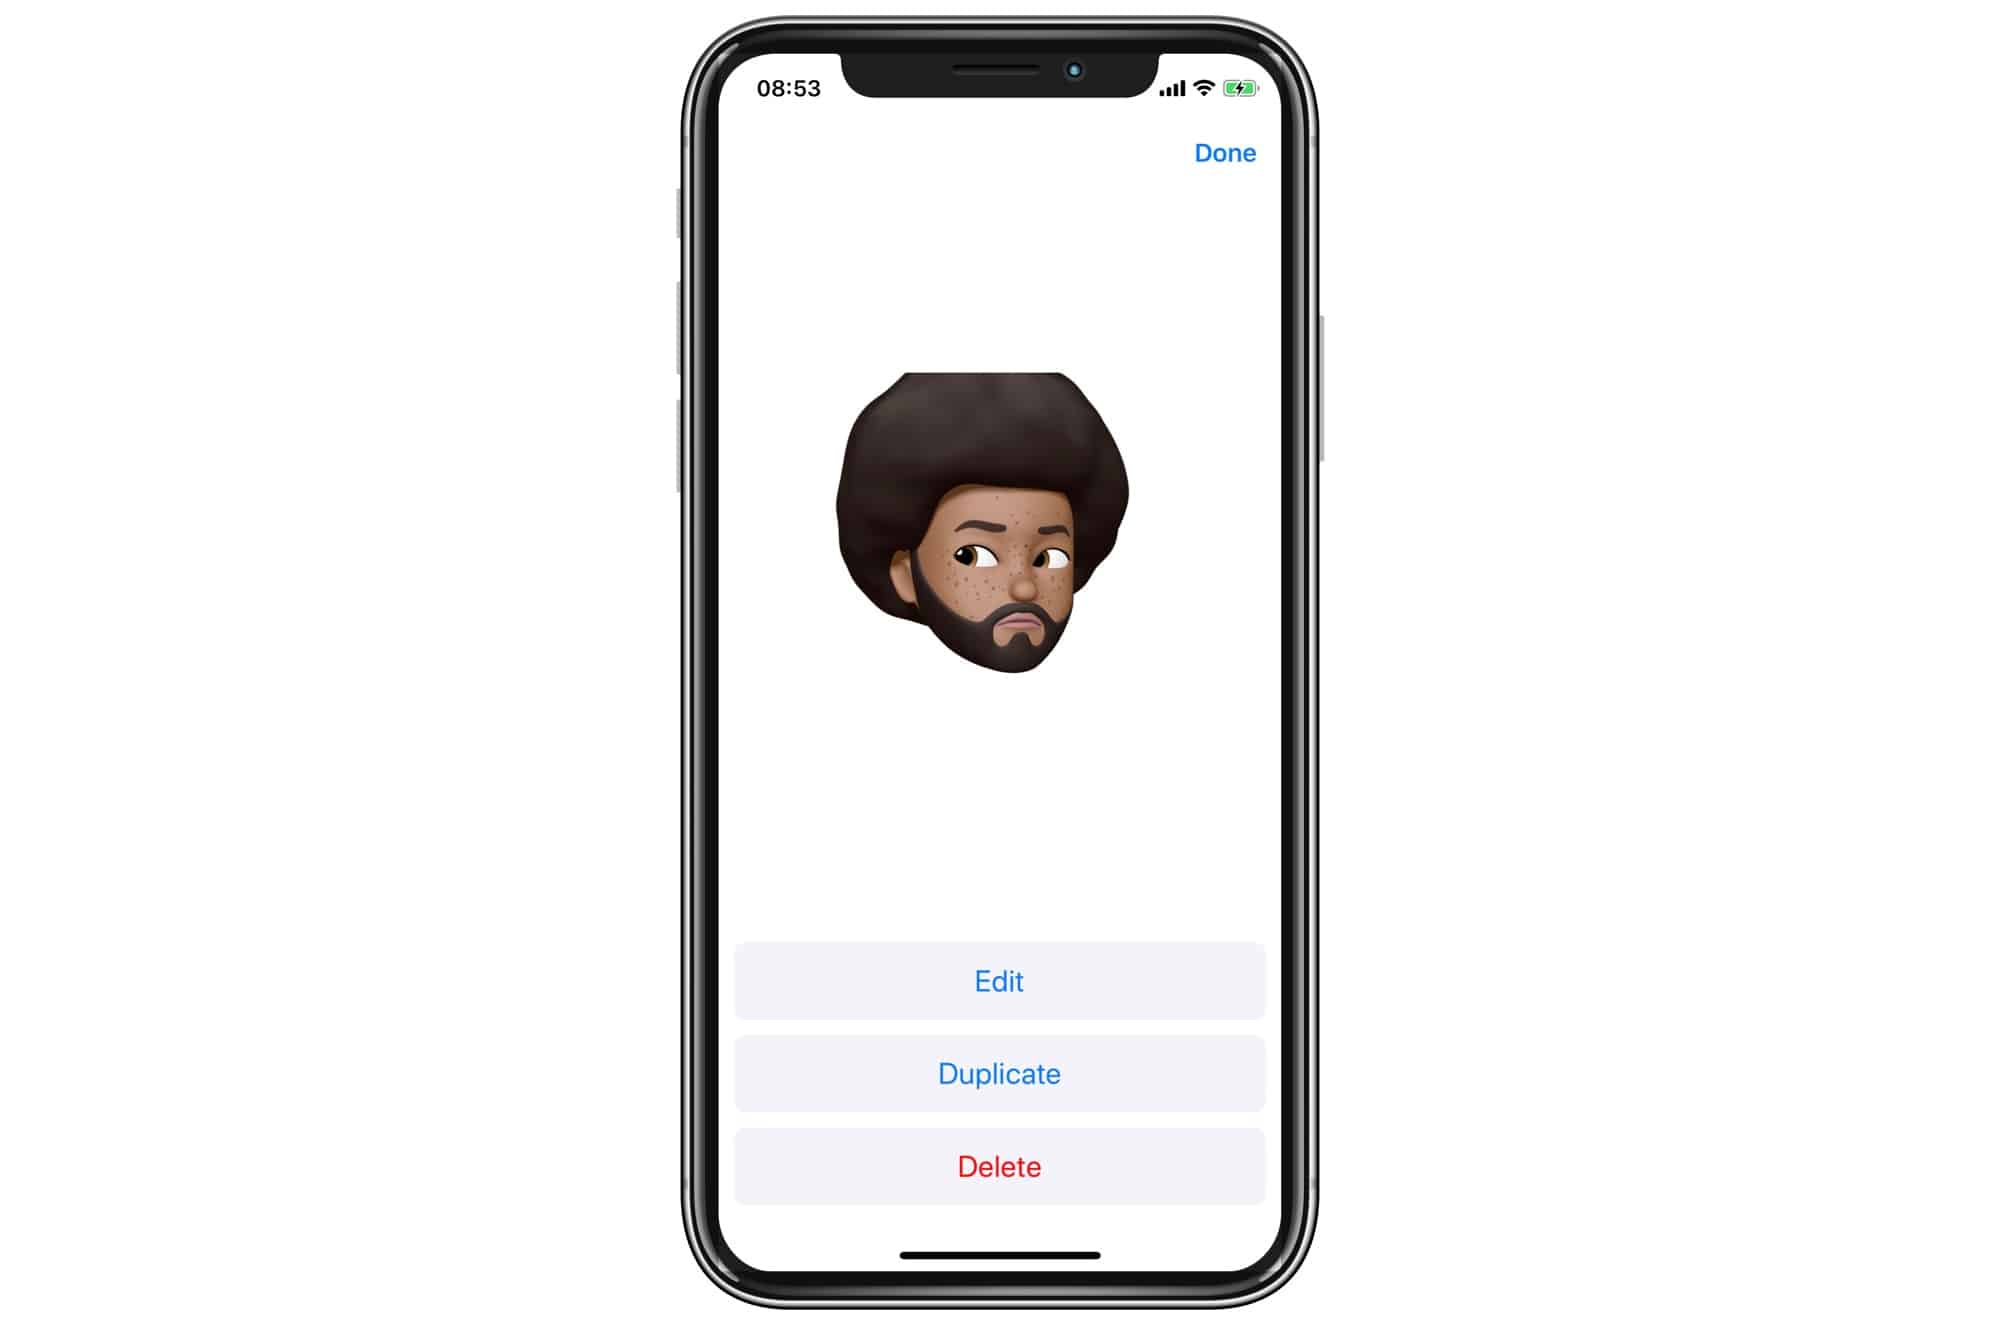 This Colin Kaepernick Memoji doesn't look much like the football player.